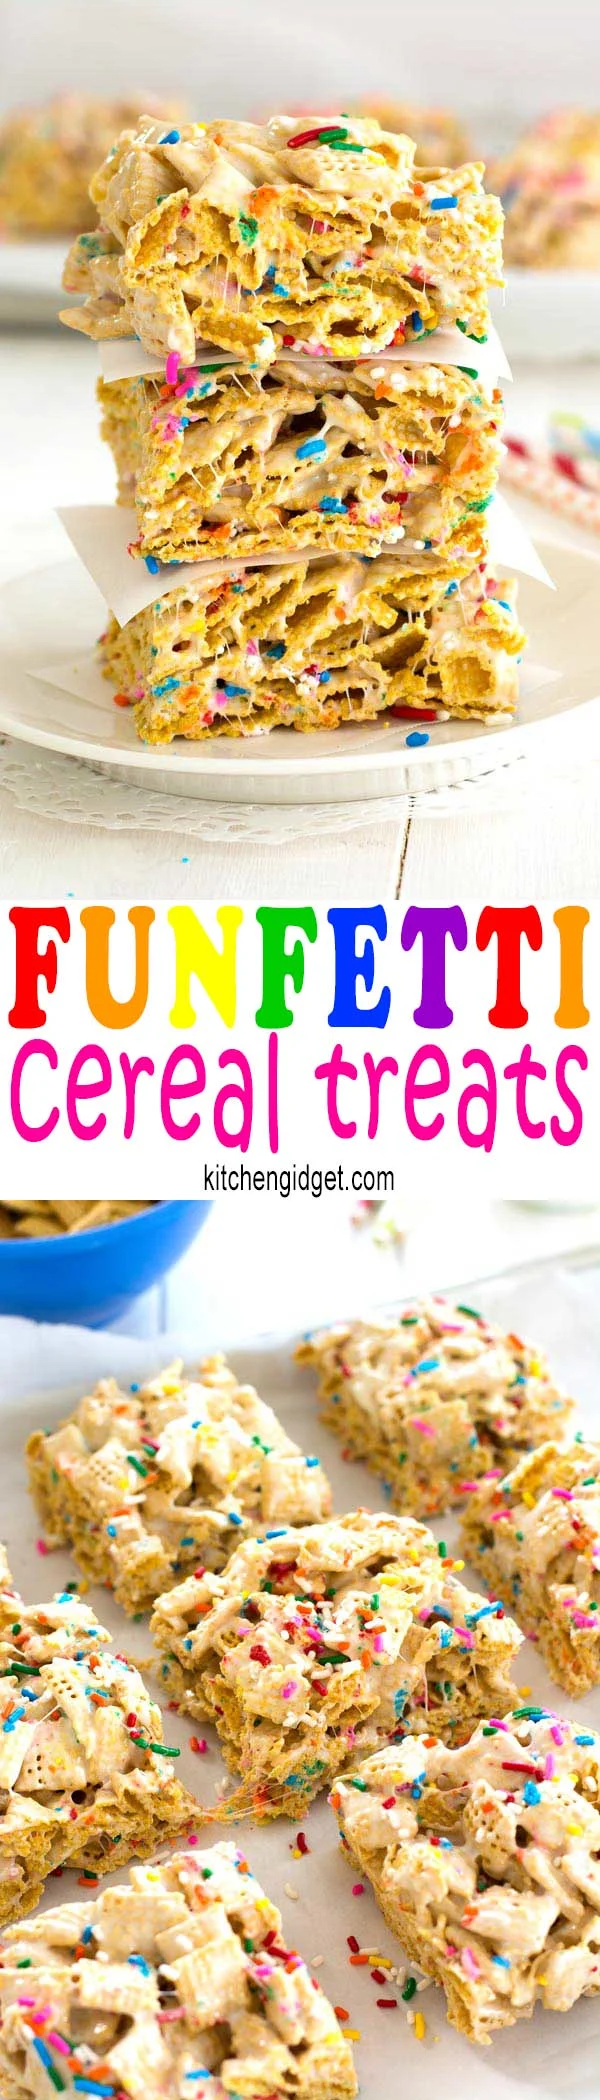 Funfetti Marshmallow Crispy Treats - cereal bars made with Chex, sprinkles and a hint of vanilla!